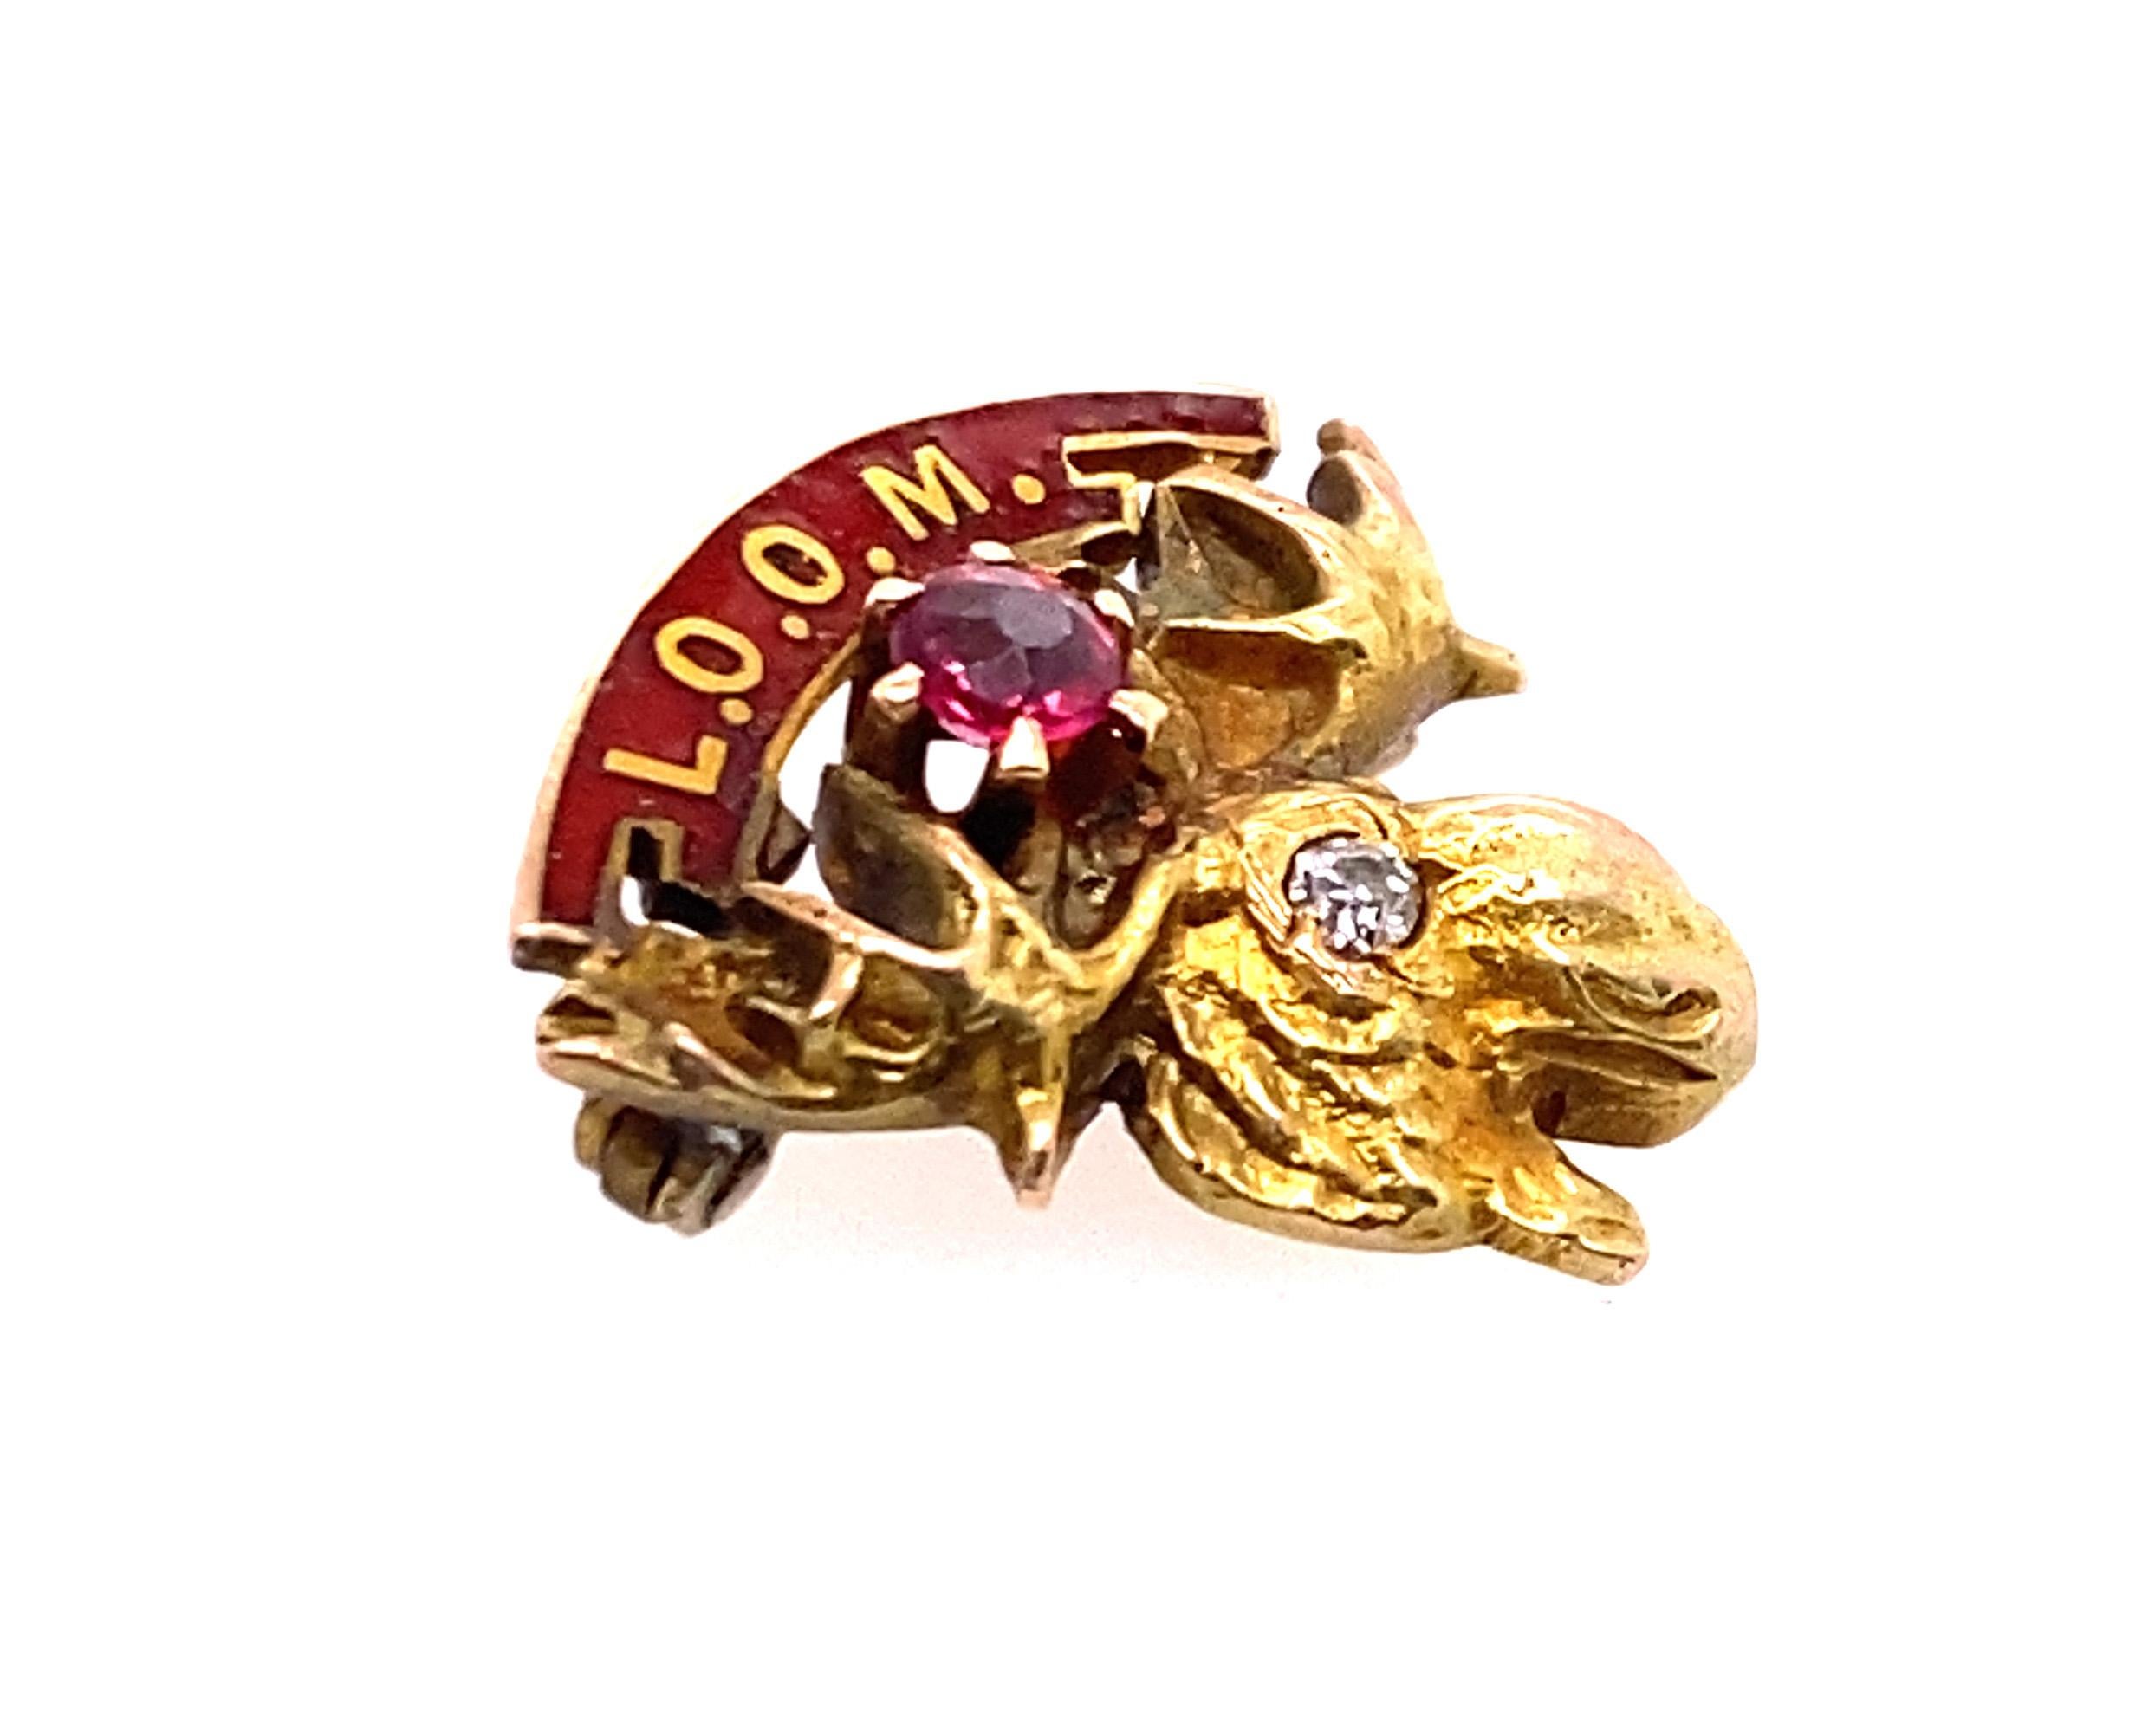 Vintage Antique Loyal Order of the Moose Diamond Ruby Yellow Gold Pin Brooch Victorian


Features a Genuine Natural Round Ruby Gemstone

This Pin Weighs 2.7 Grams

That's Over $65 in Gold Value Alone

100% Natural Diamond & Ruby

.29 Carat Diamond